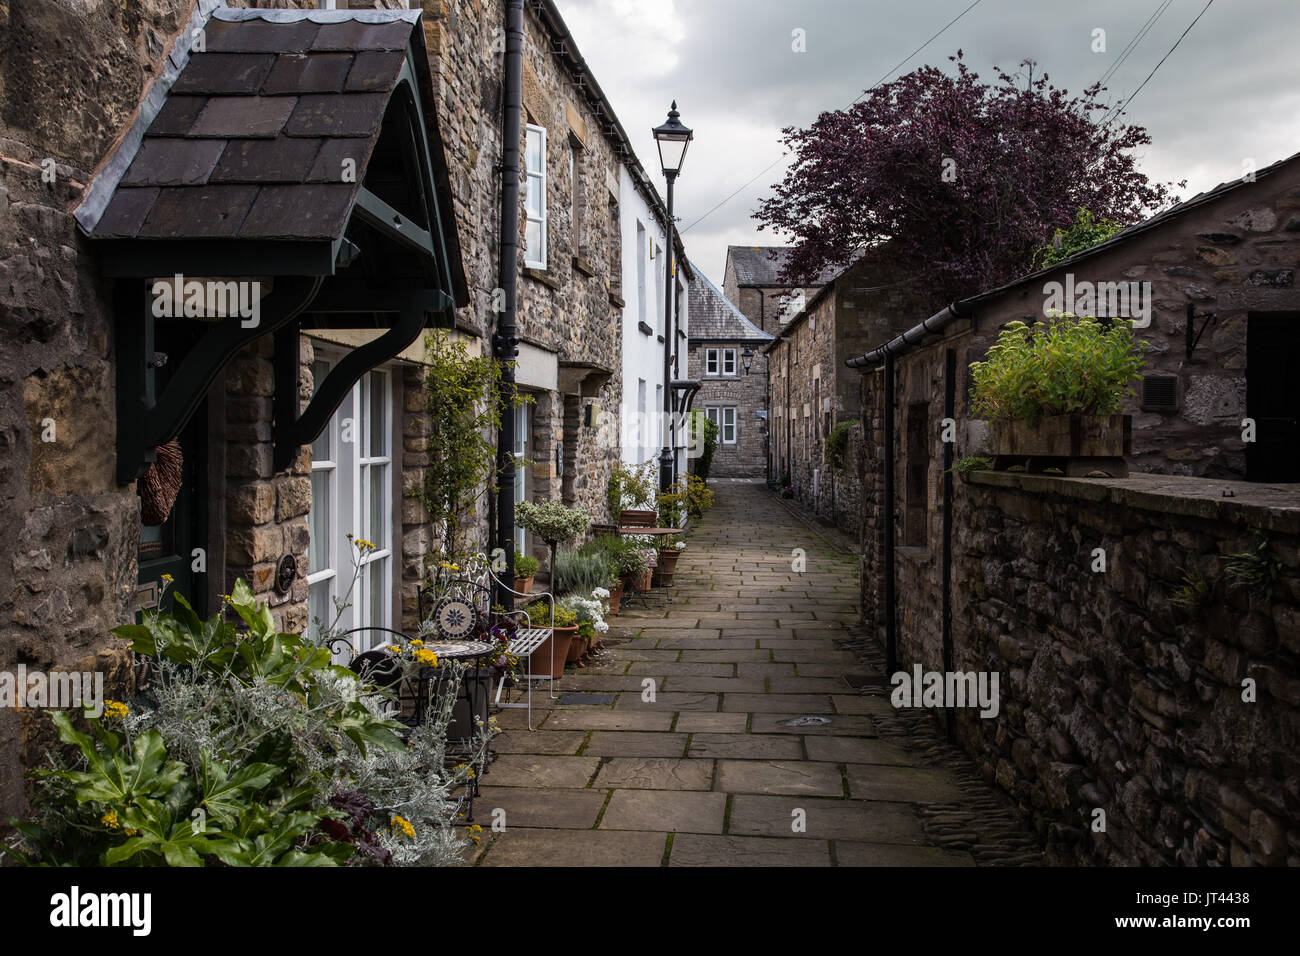 A small paved street with terraced cottages. Stock Photo